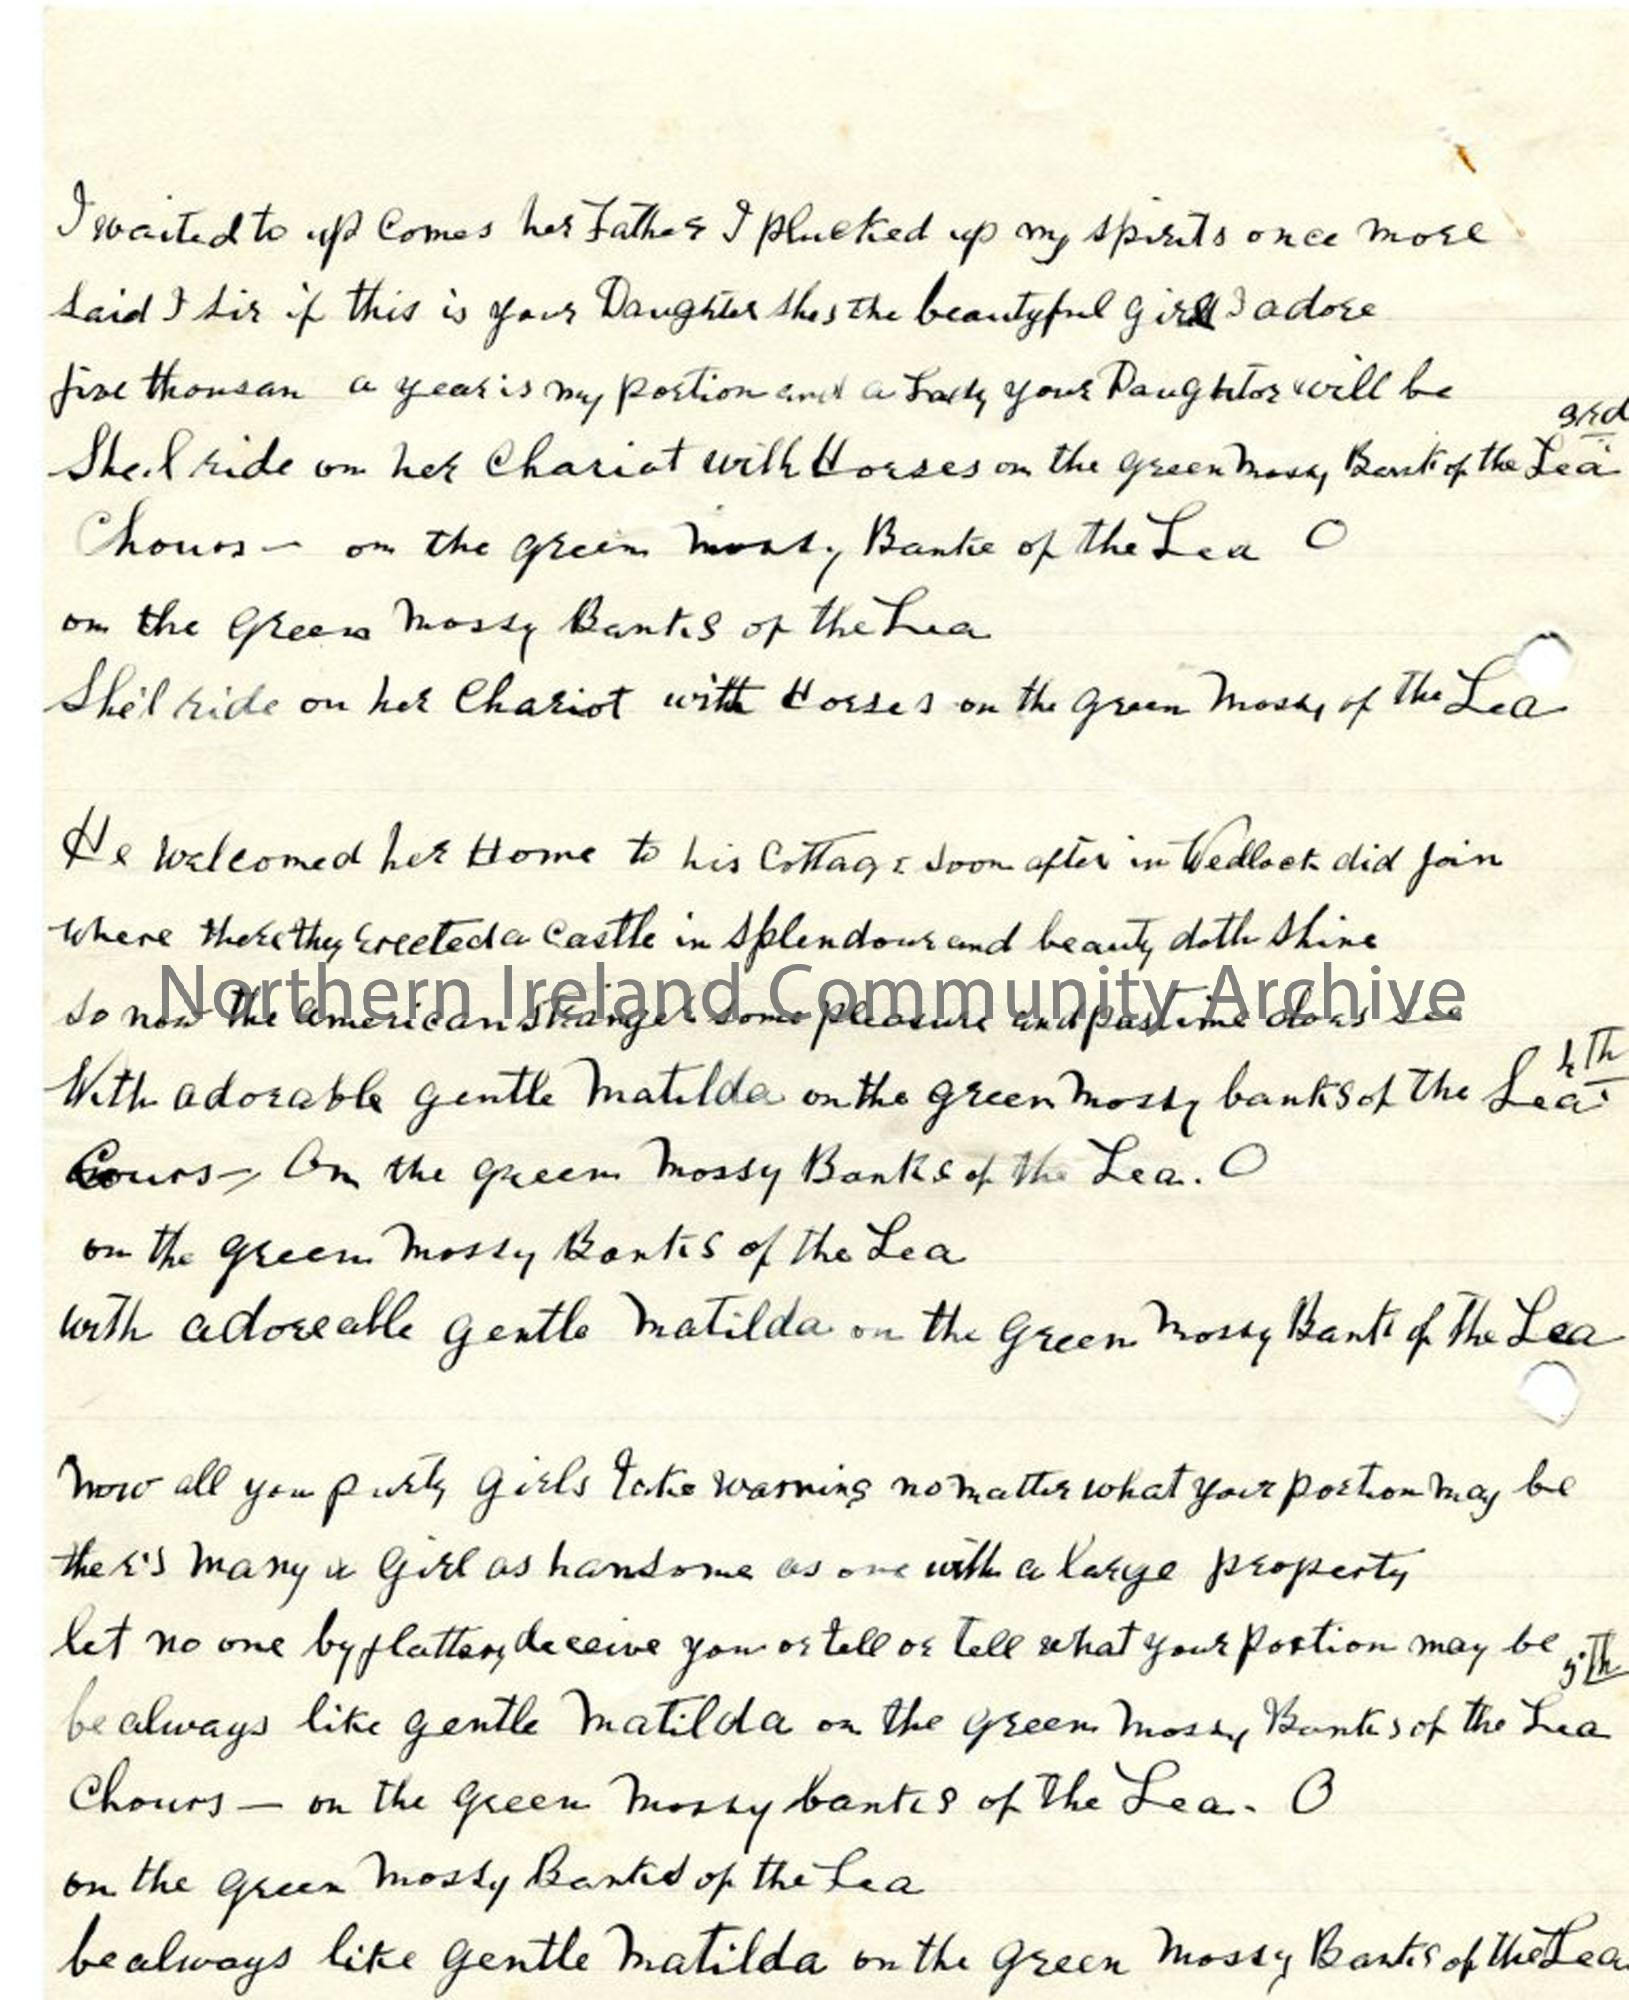 Page 2 – Handwritten words to ‘The Green Mossy Banks of the Lea’